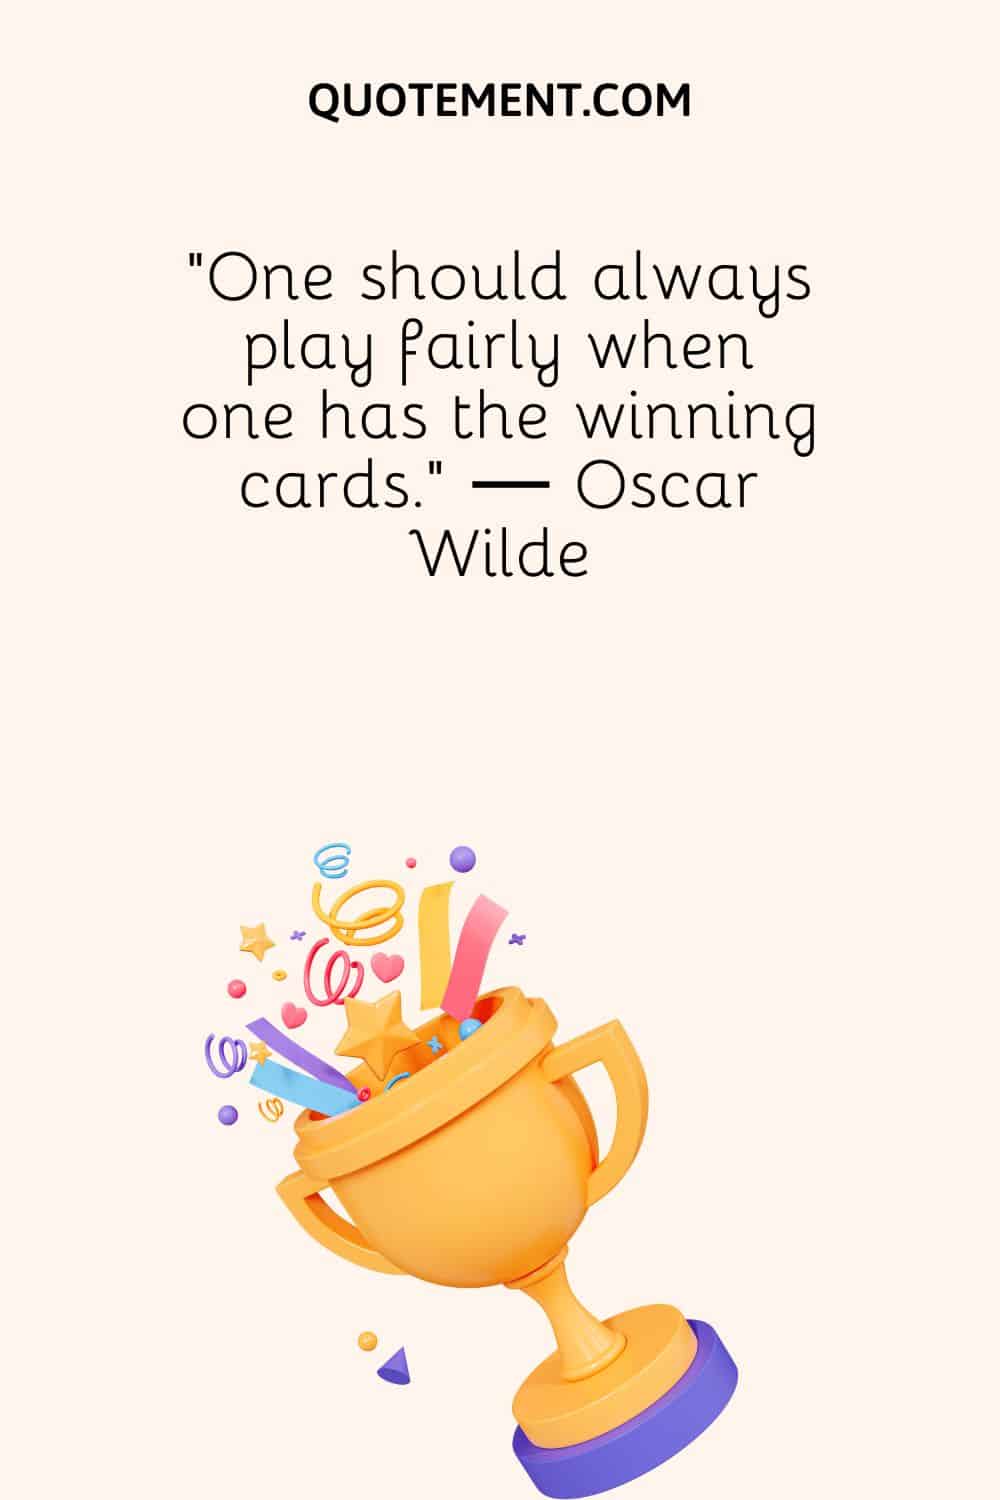 trophy illustration representing winning quote